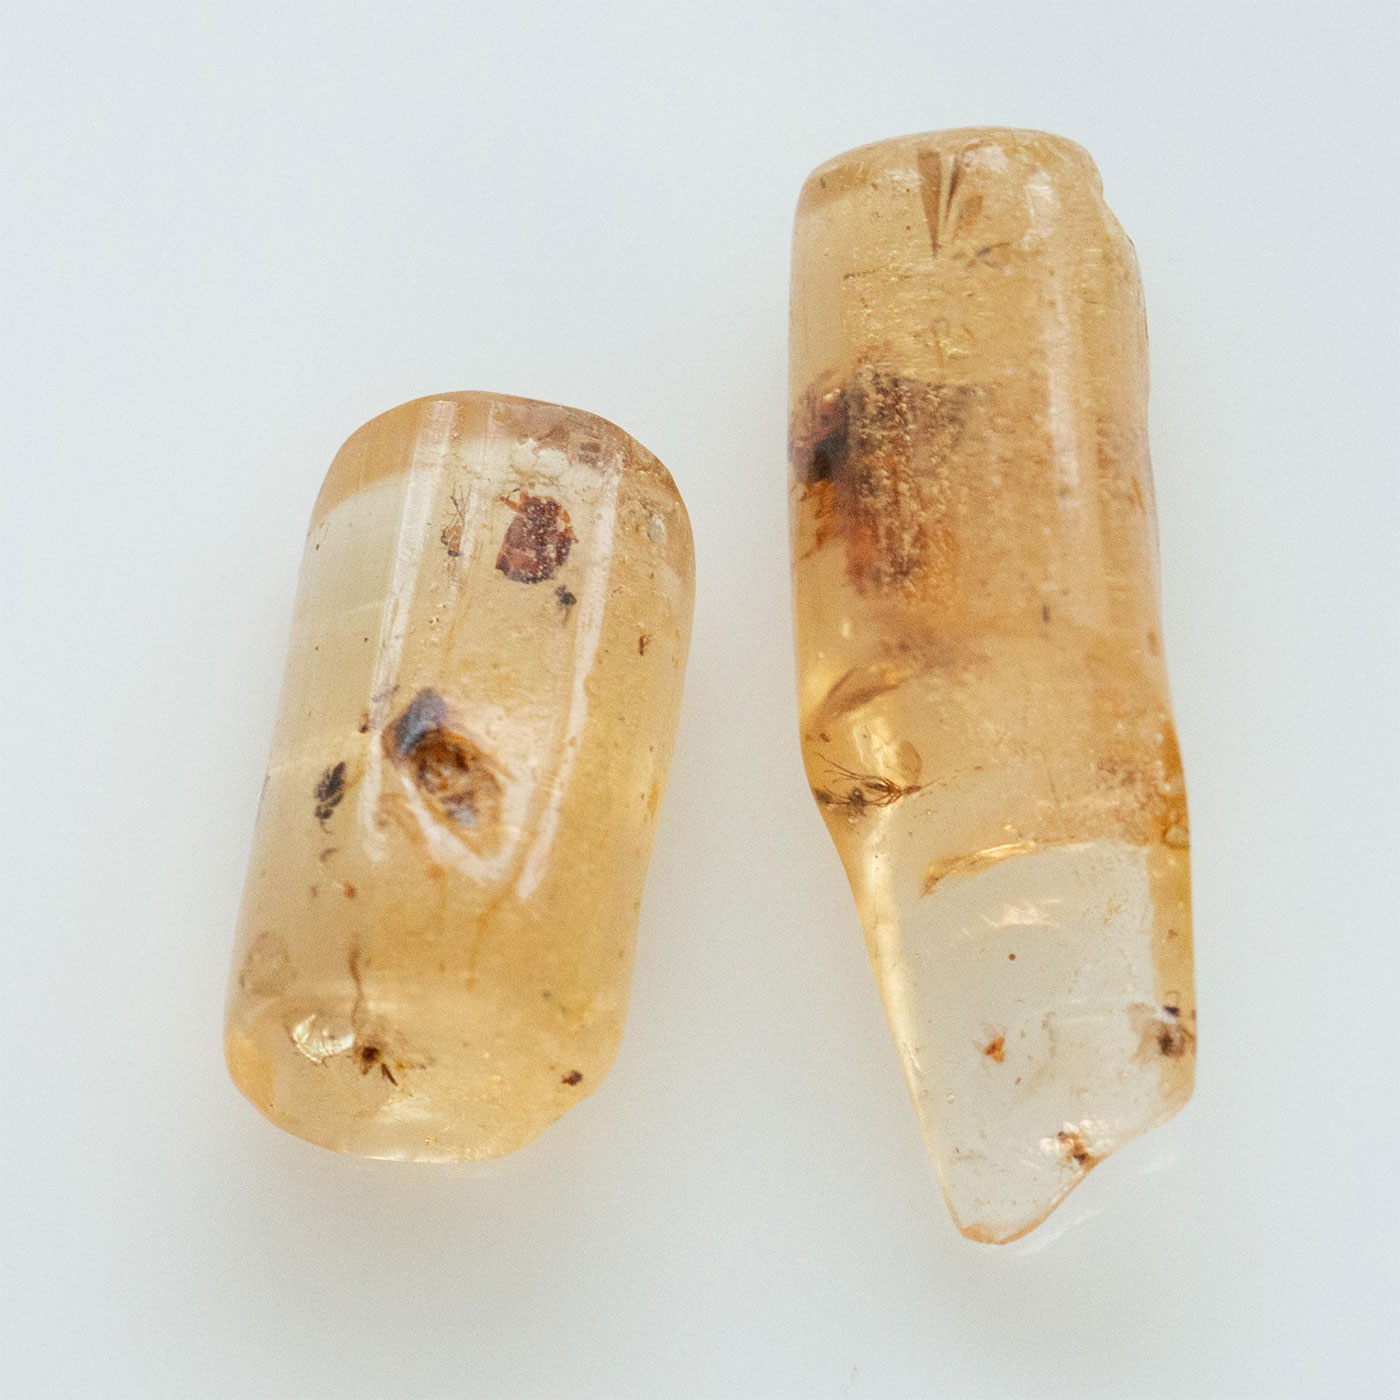 2 POLISHED LIGHT HONEY COPAL AMBER RODS W. MANY INSECTS - Image 2 of 8